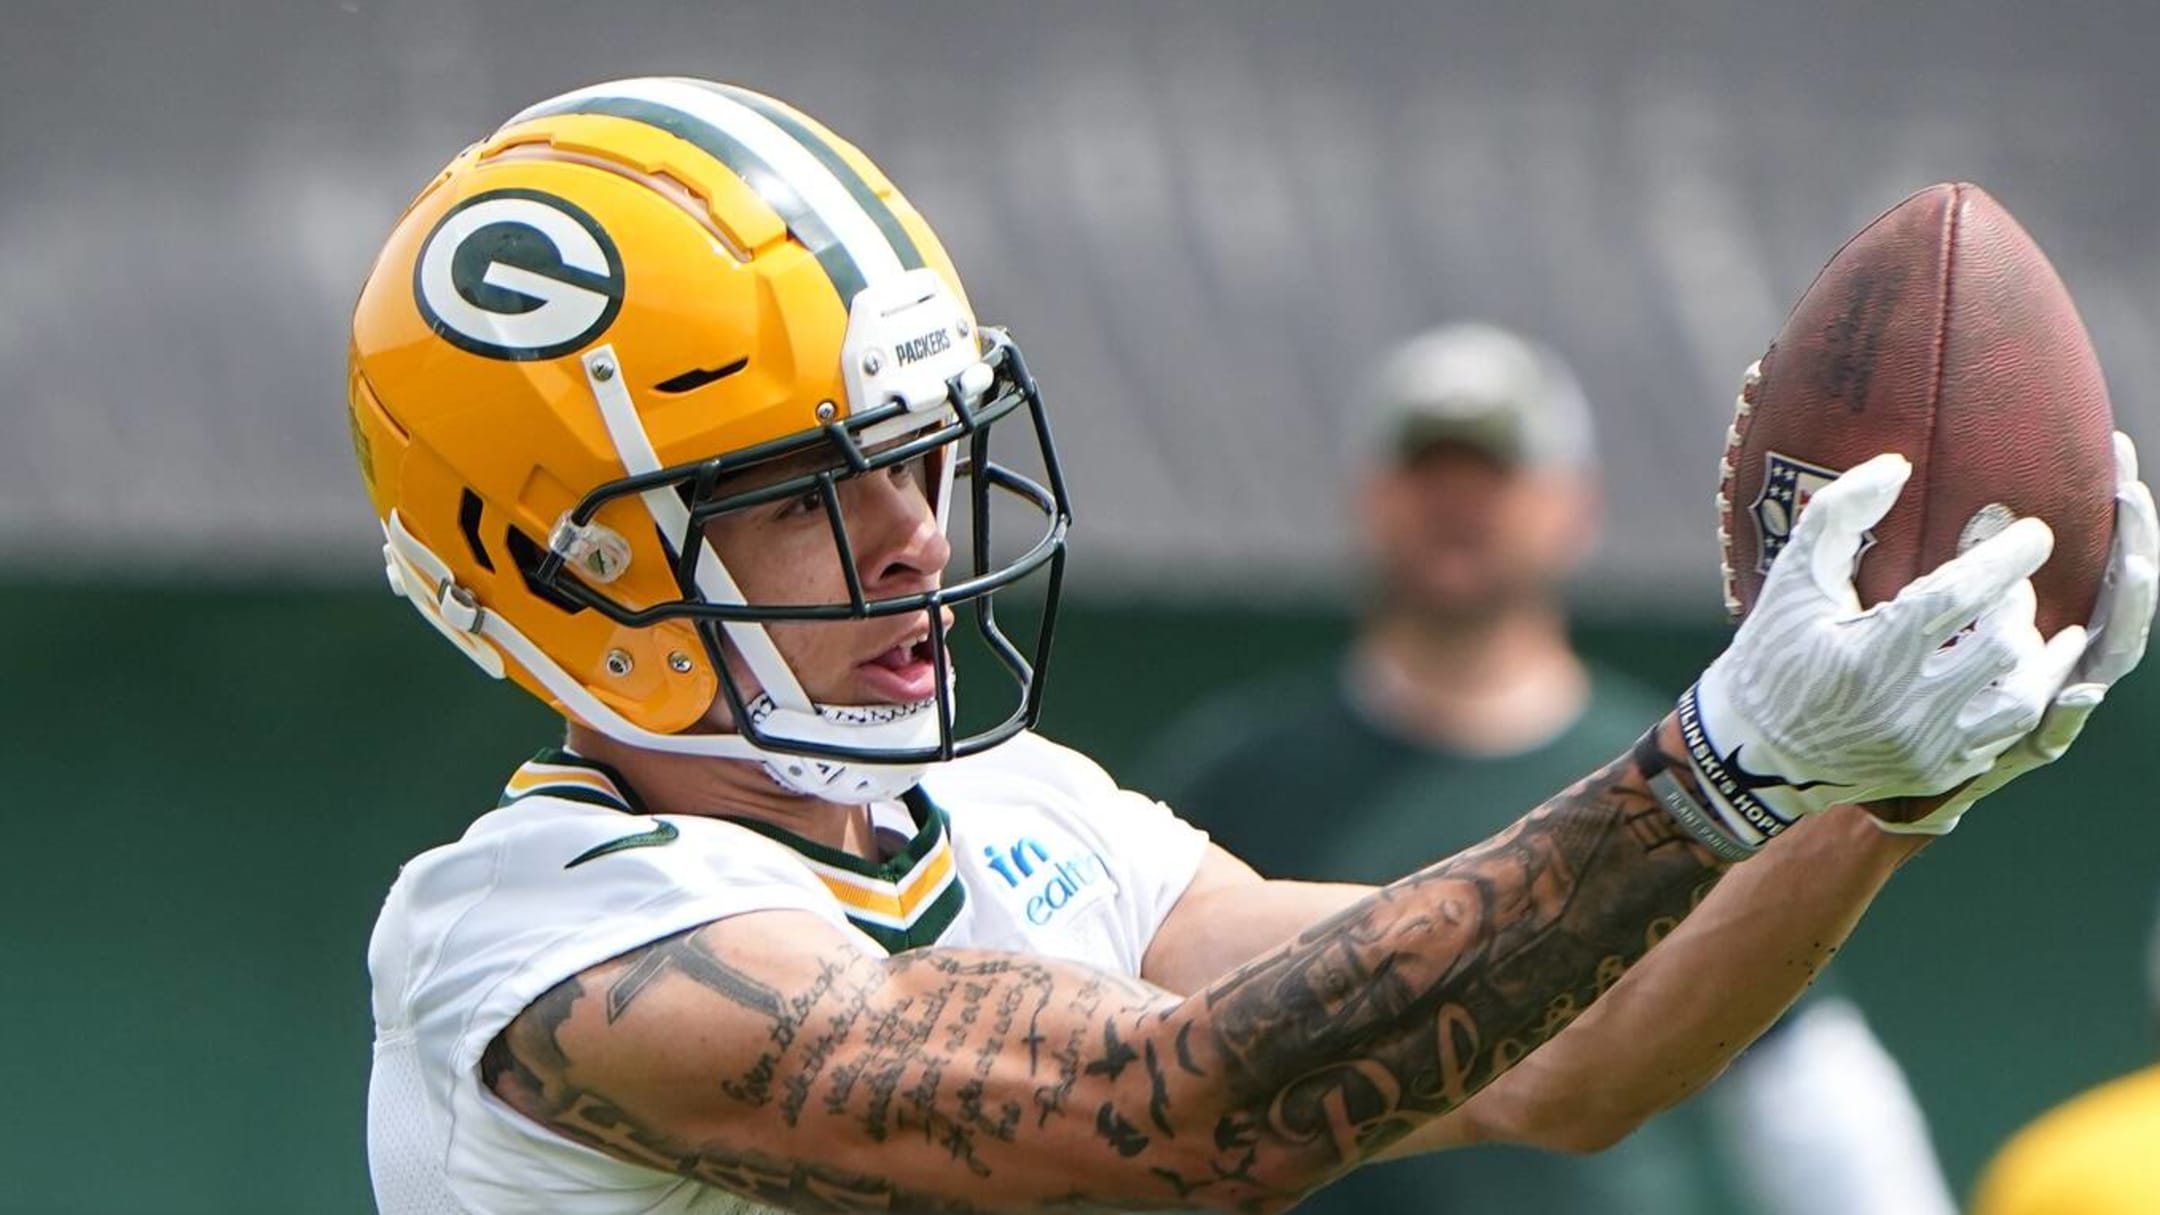 Christian Watson injury update: Packers rookie WR out vs. Bills